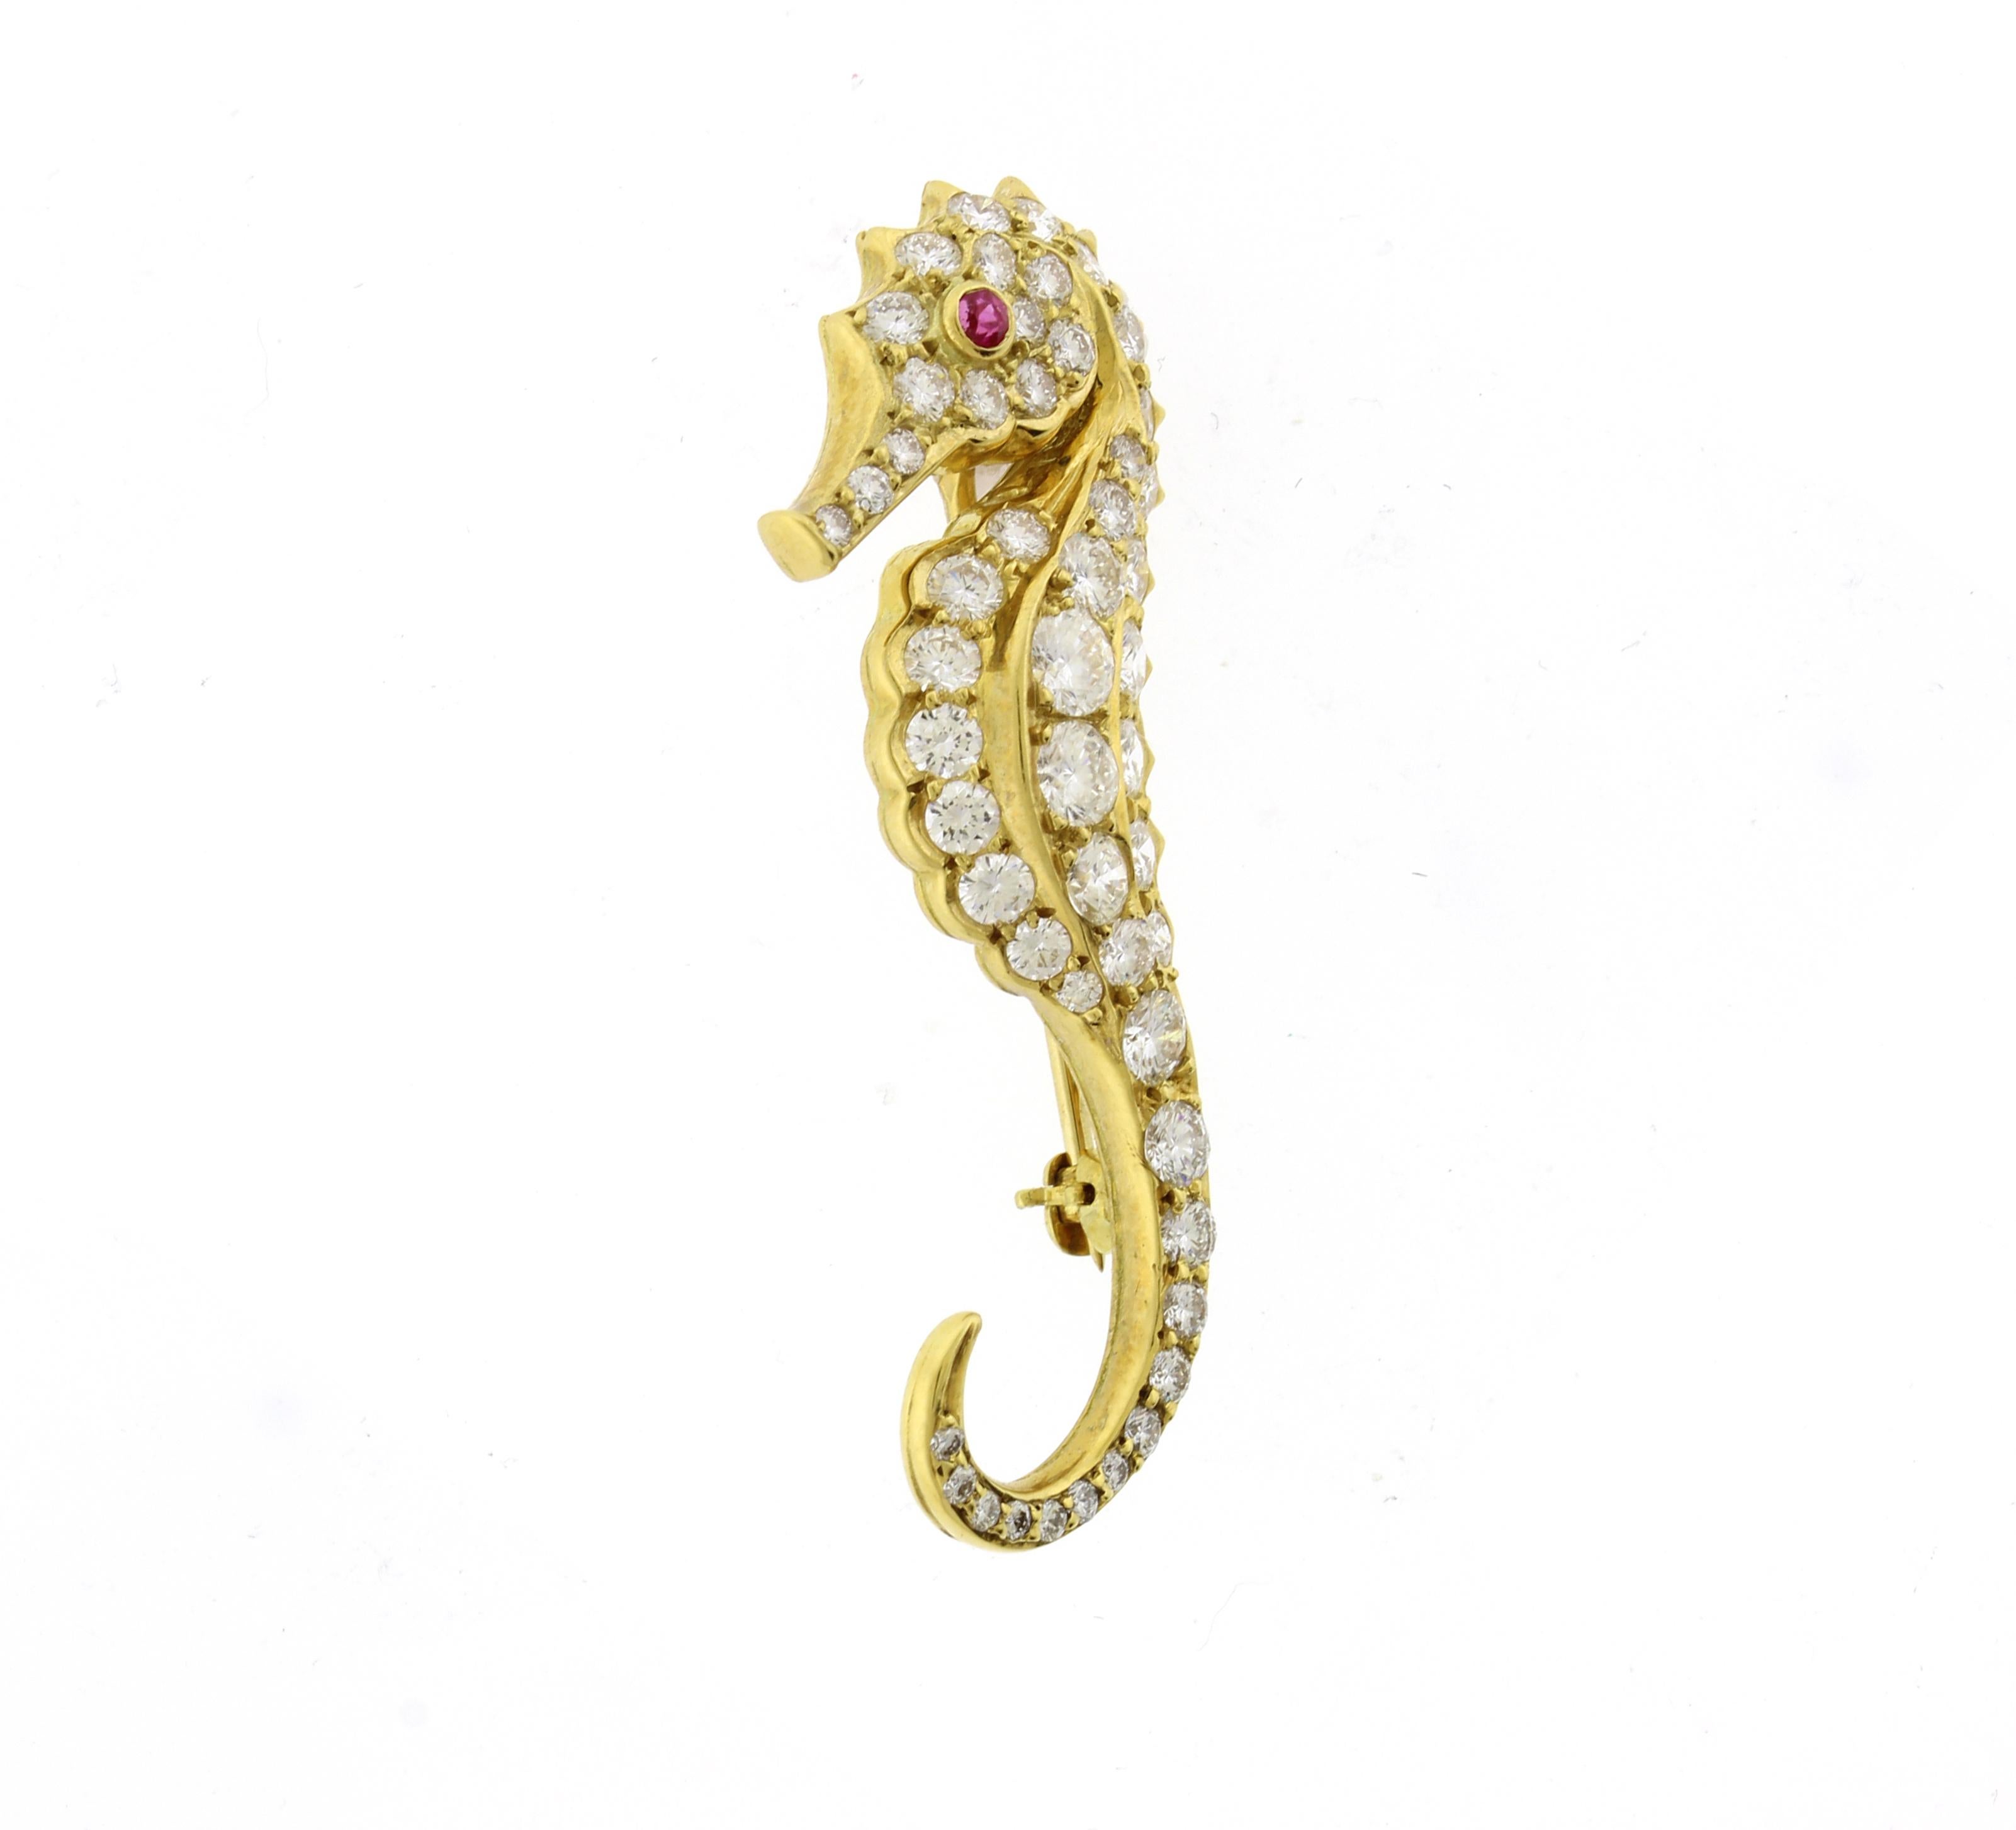 Brilliant Cut Diamond and Ruby Seahorse Brooch by Pampillonia Jewelers